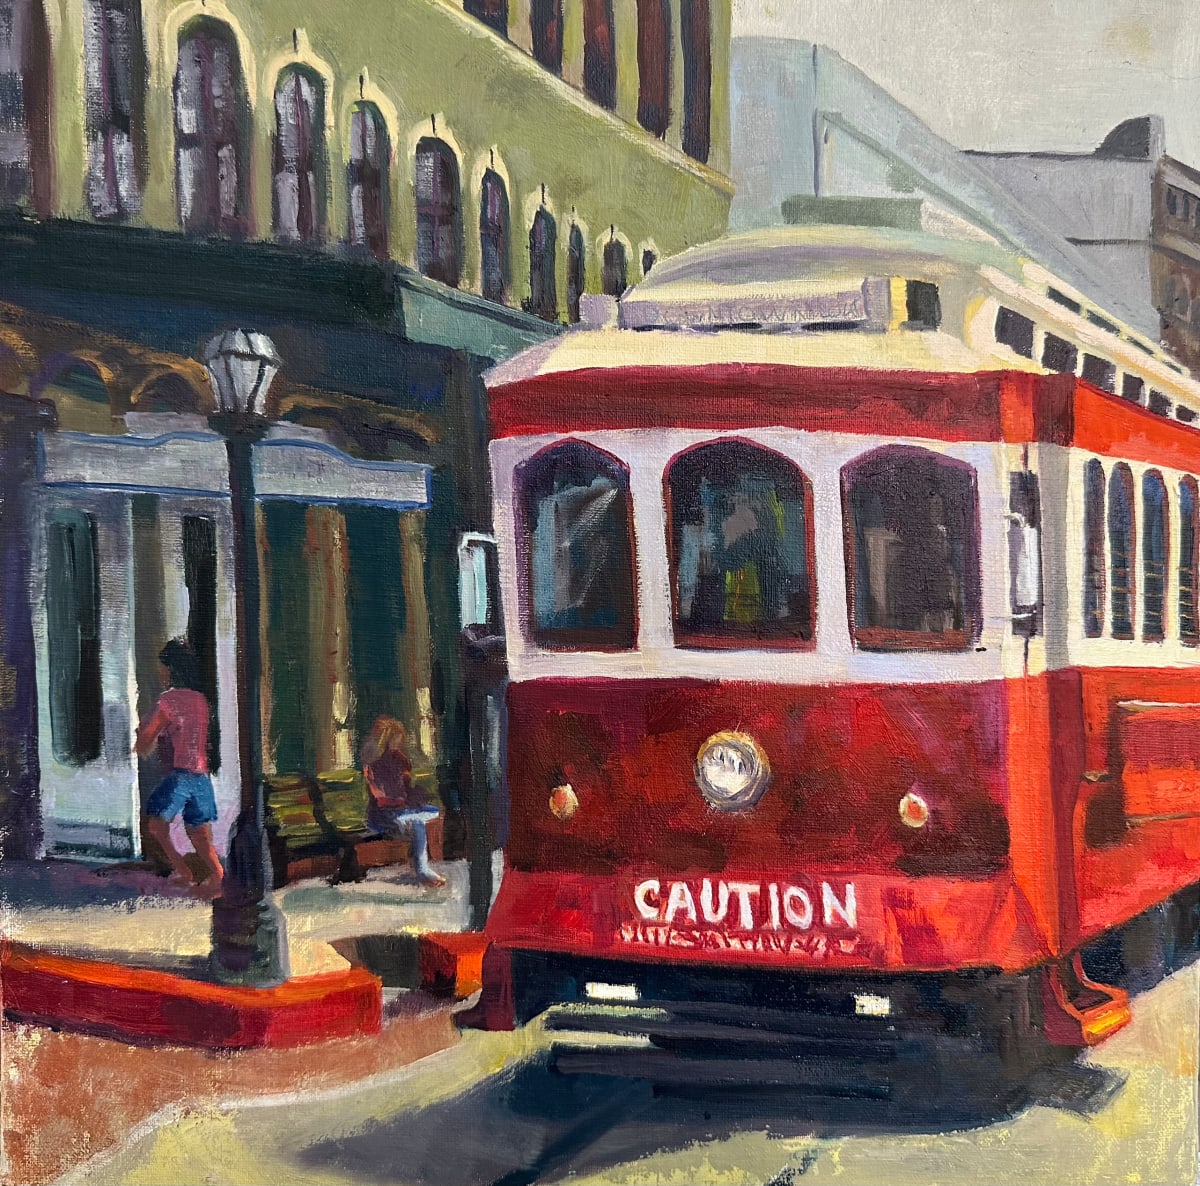 Trolley by susan tyler  Image: The trolleys are back!